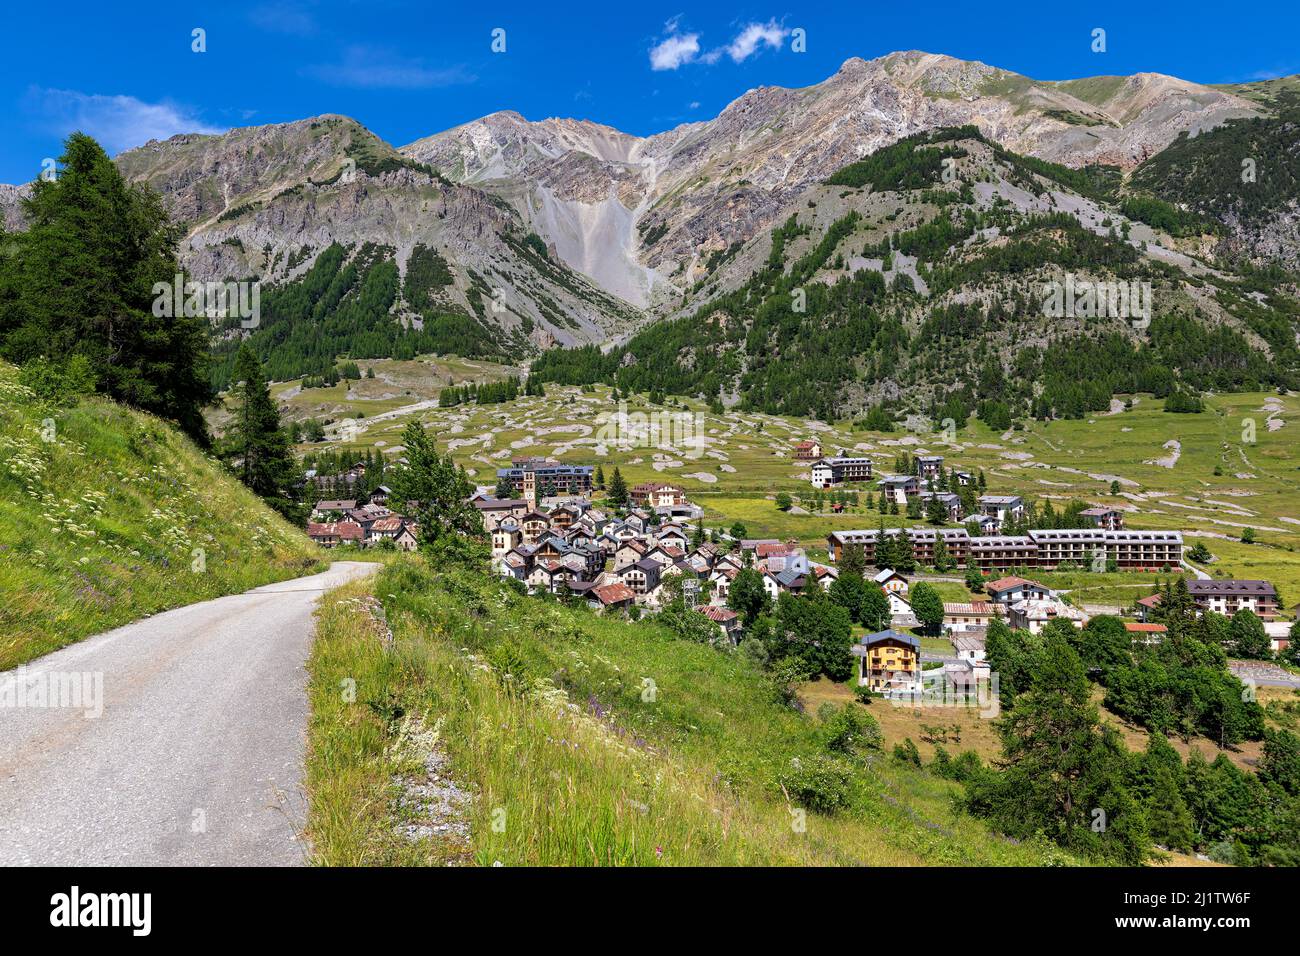 Small alpine town of Bersezio among green hills and mountains under blue sky in Piedmont, Northern Italy. Stock Photo